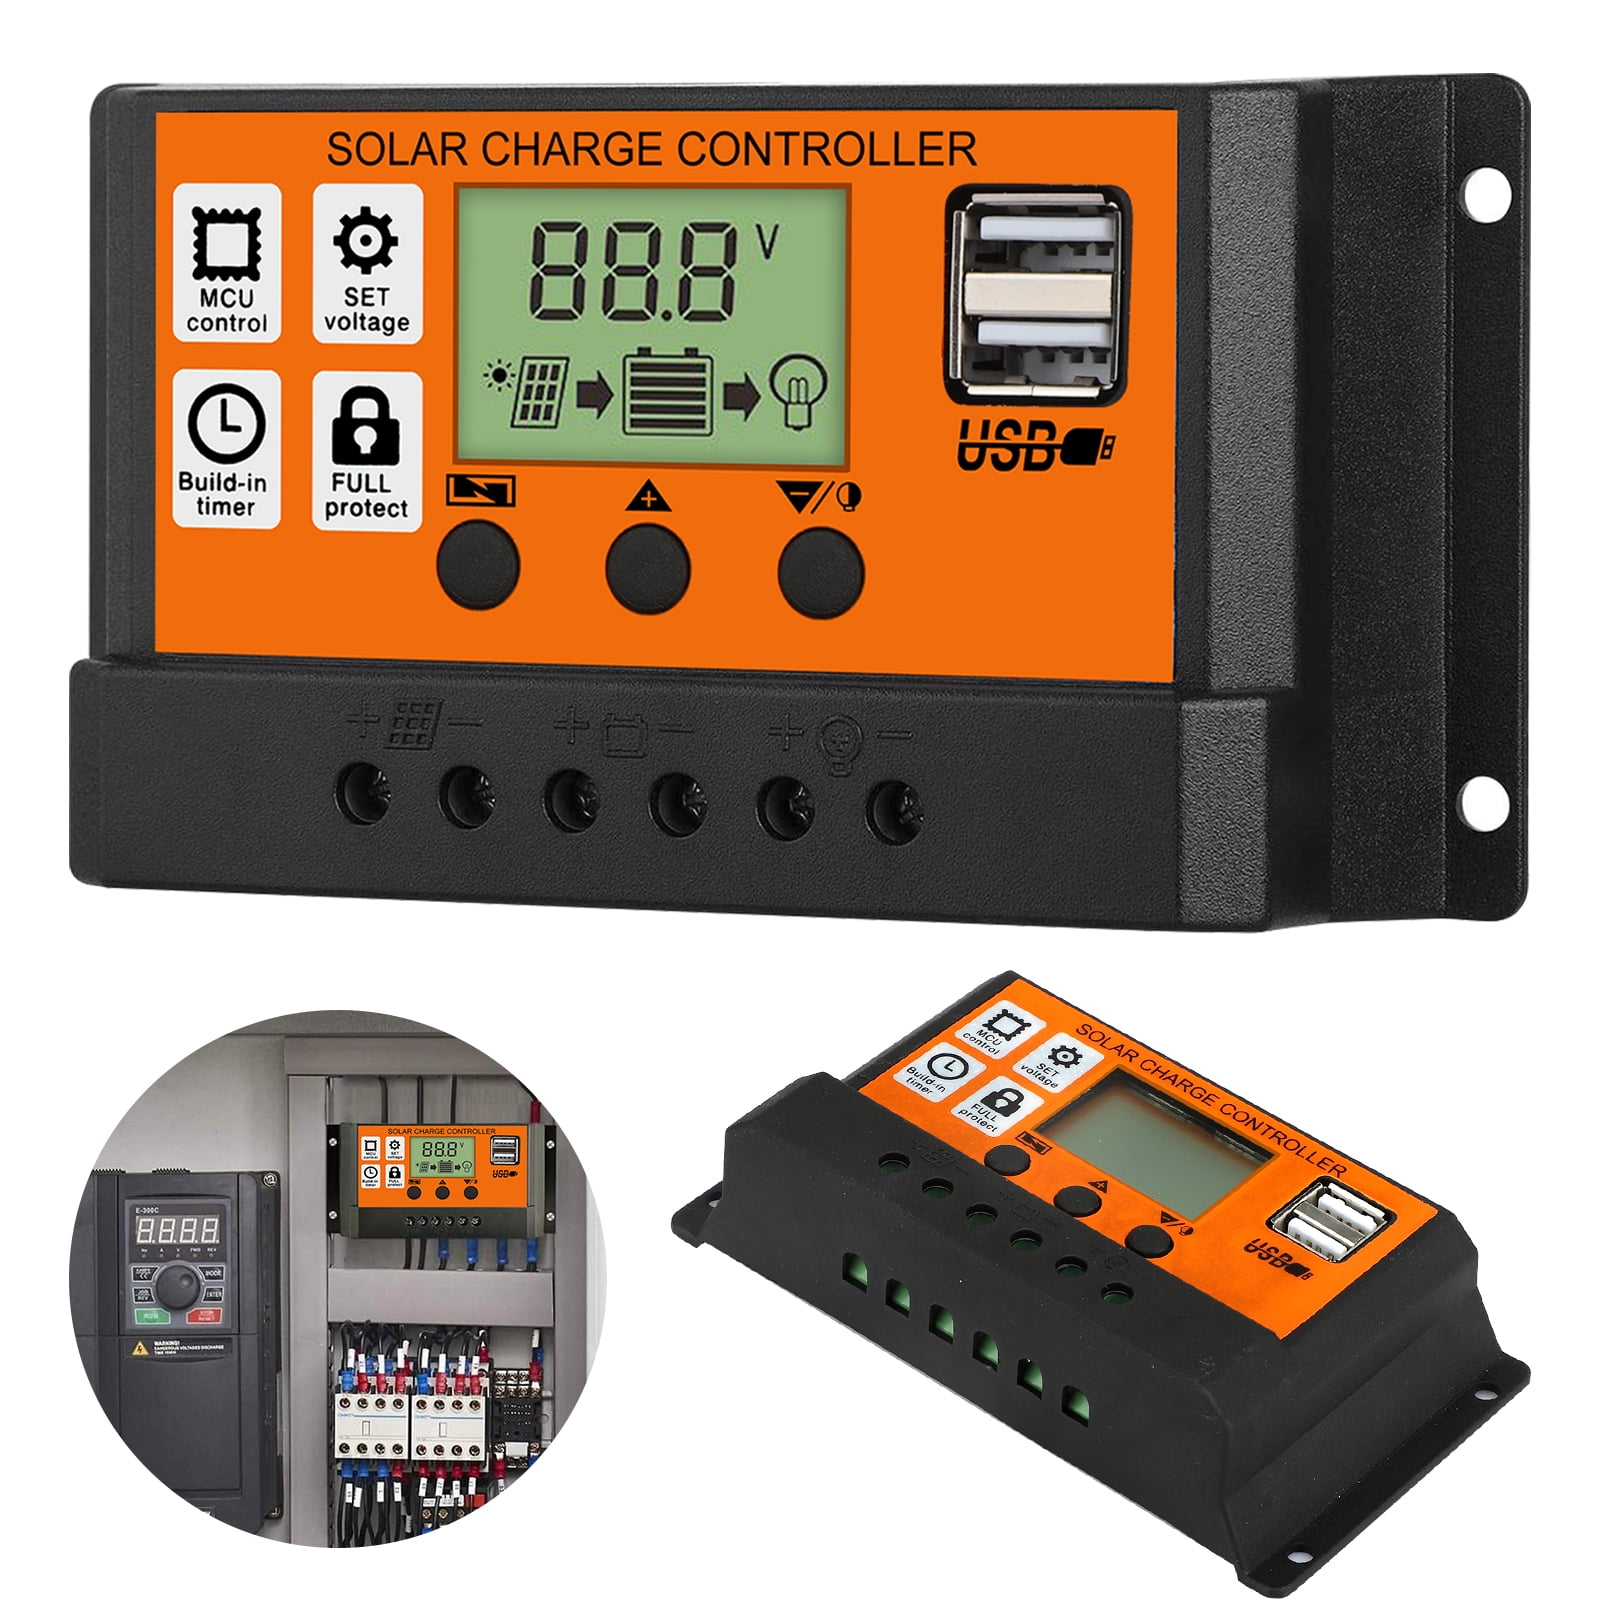 100A MPPT Solar Panel Regulator Battery Charger Controller 12/24V With LCD USB 